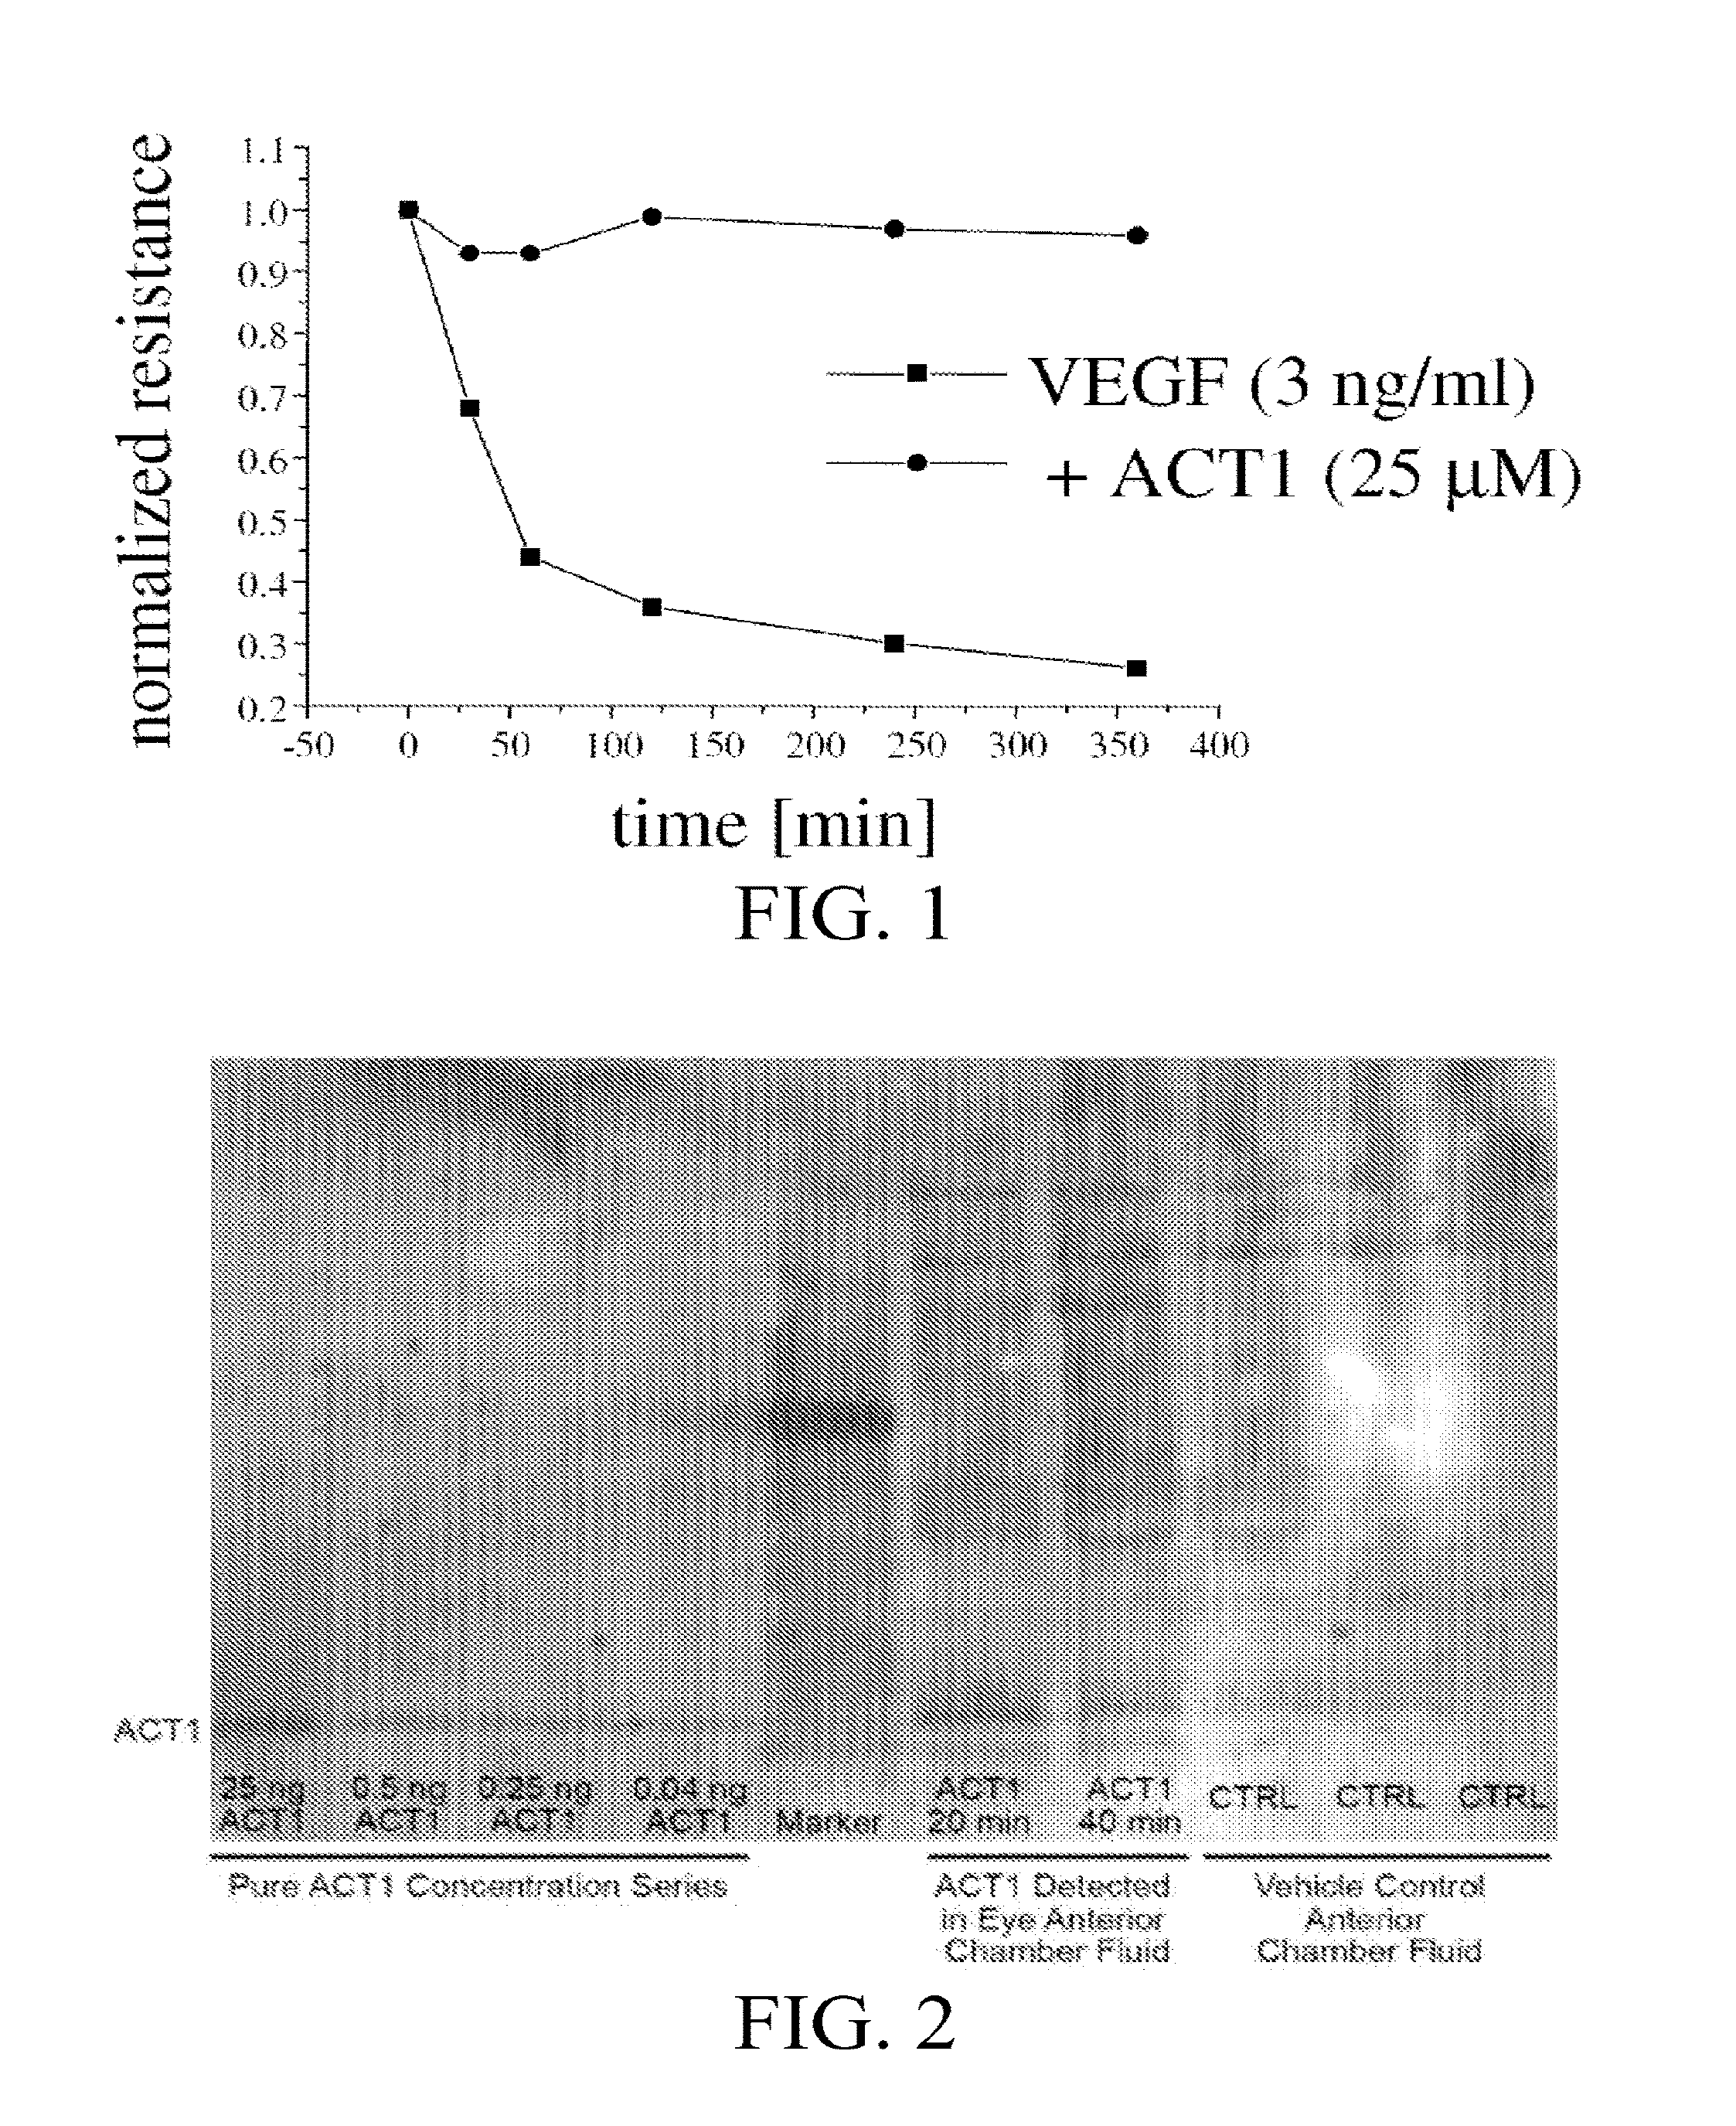 Alpha Connexin c-Terminal (ACT) peptides for use in transplant